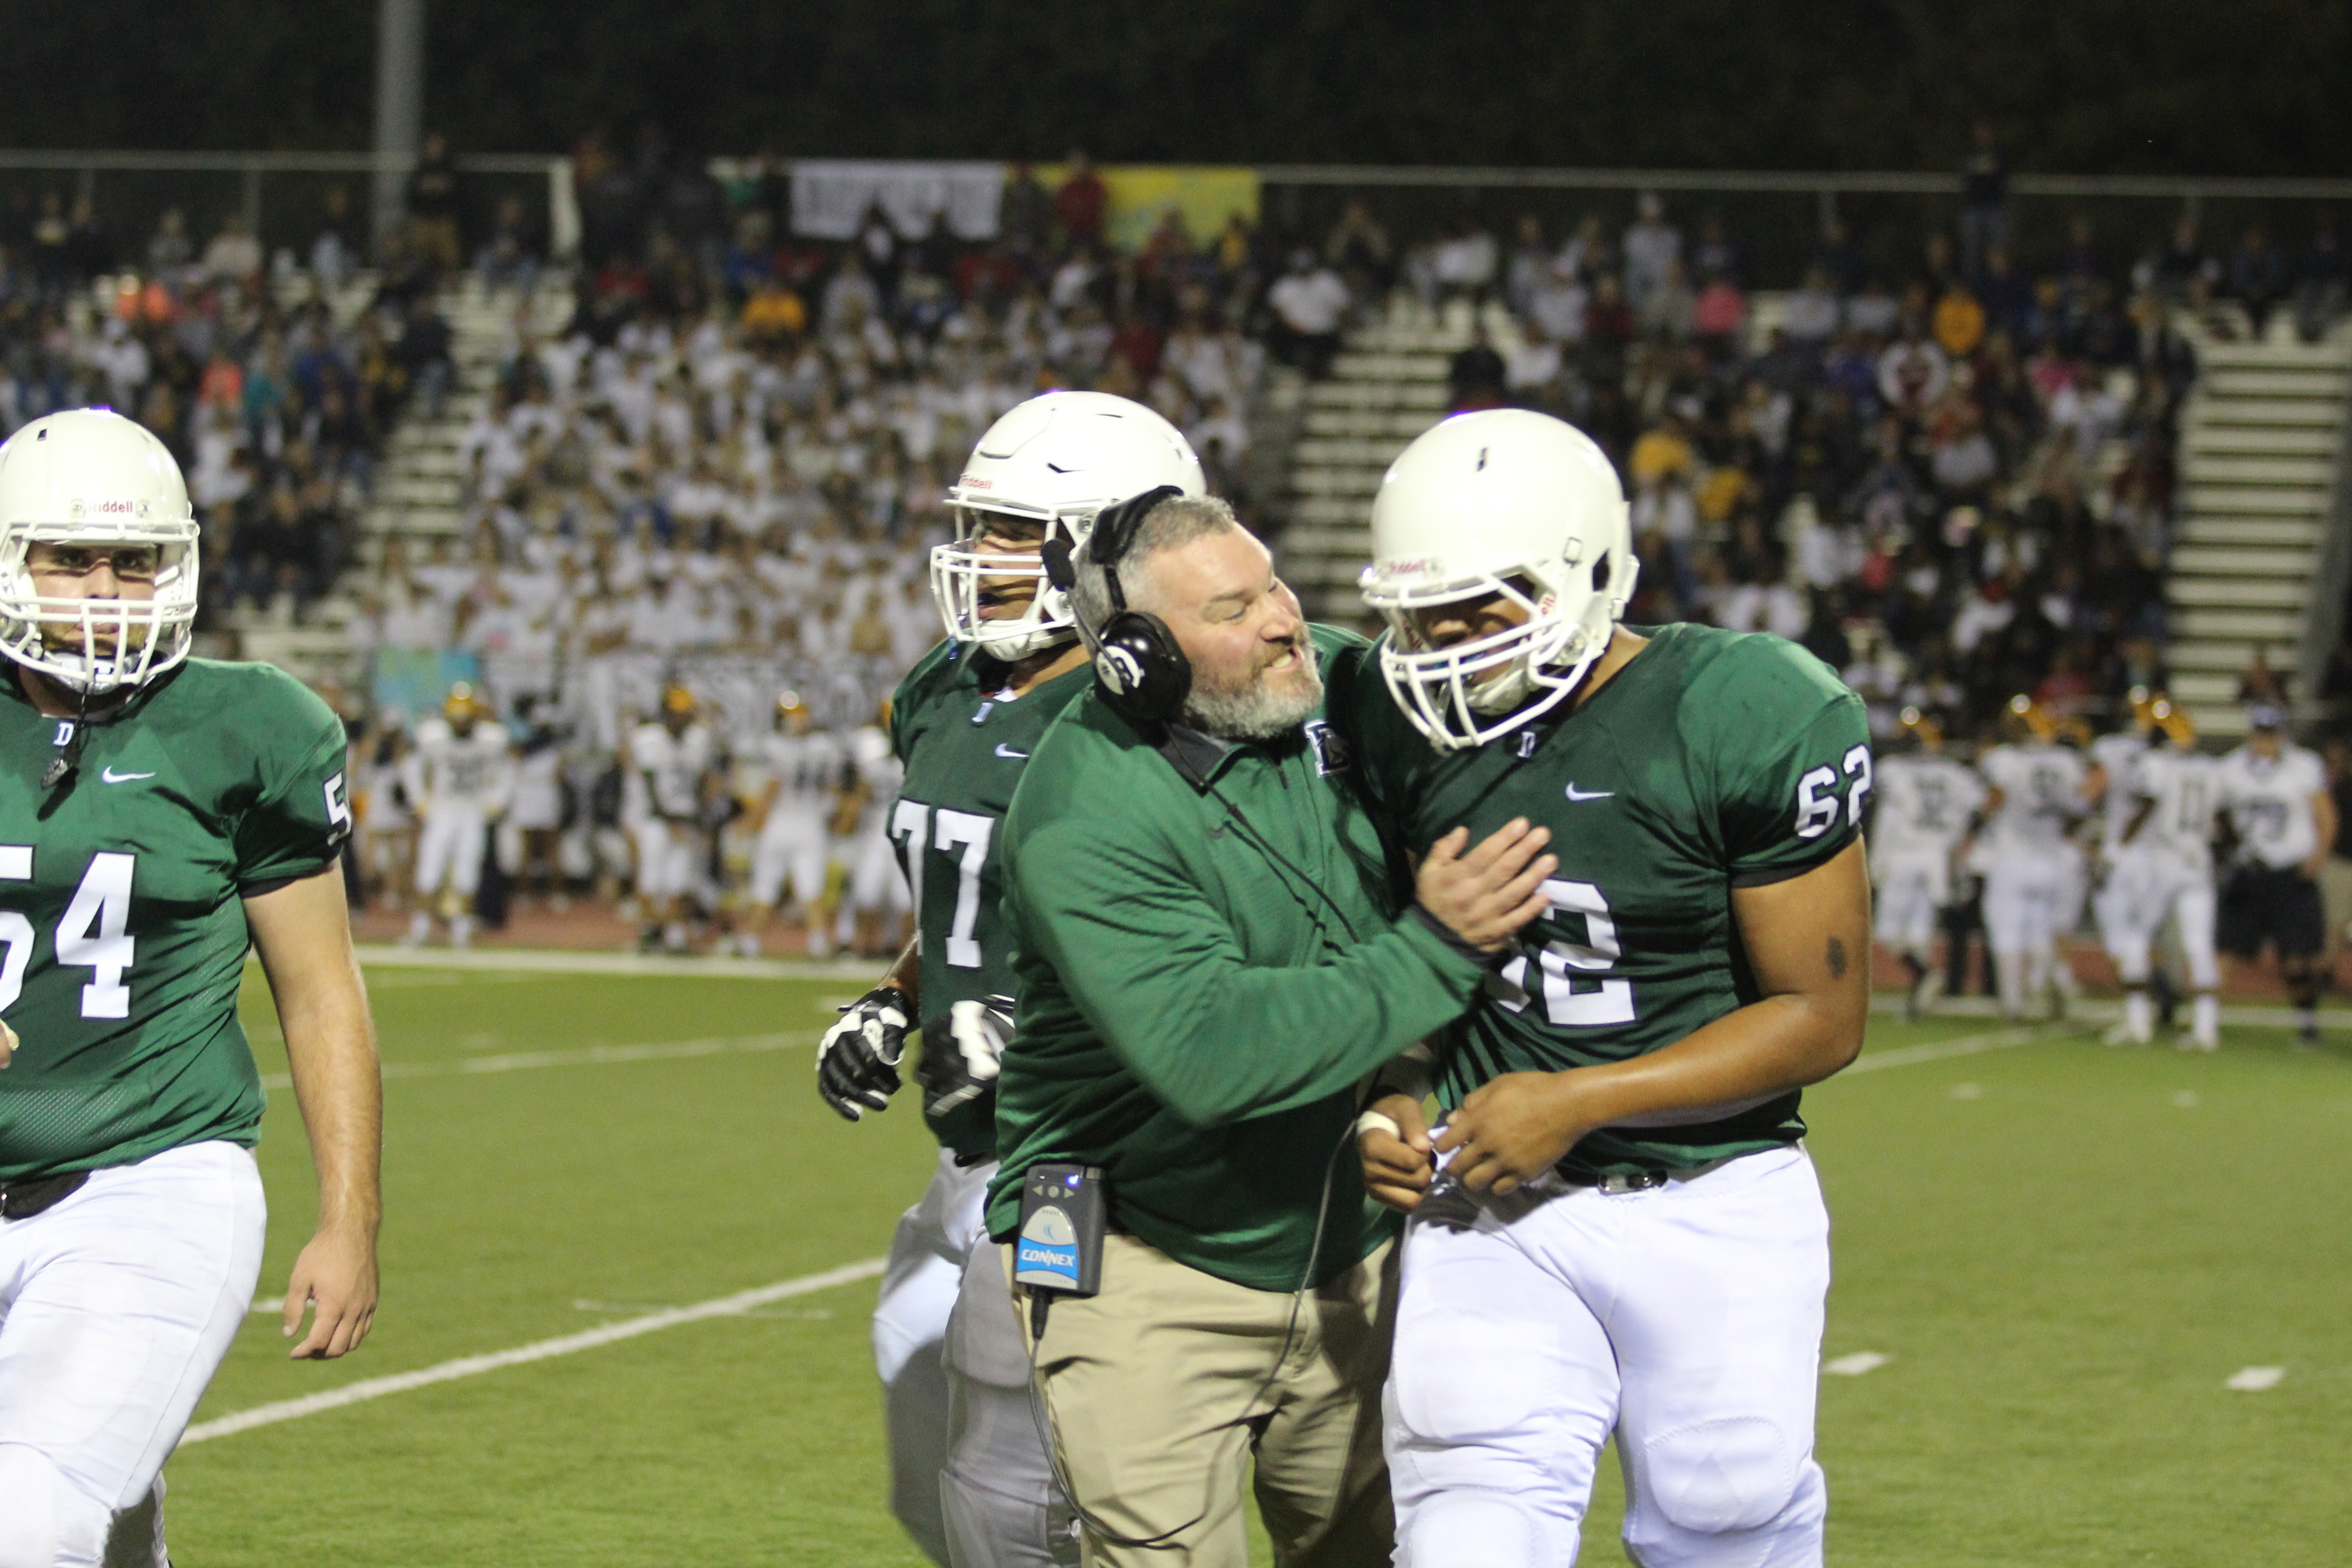 Big hugs after a big play from junior Evan Clark during the first playoff game vs Wichita Northwest